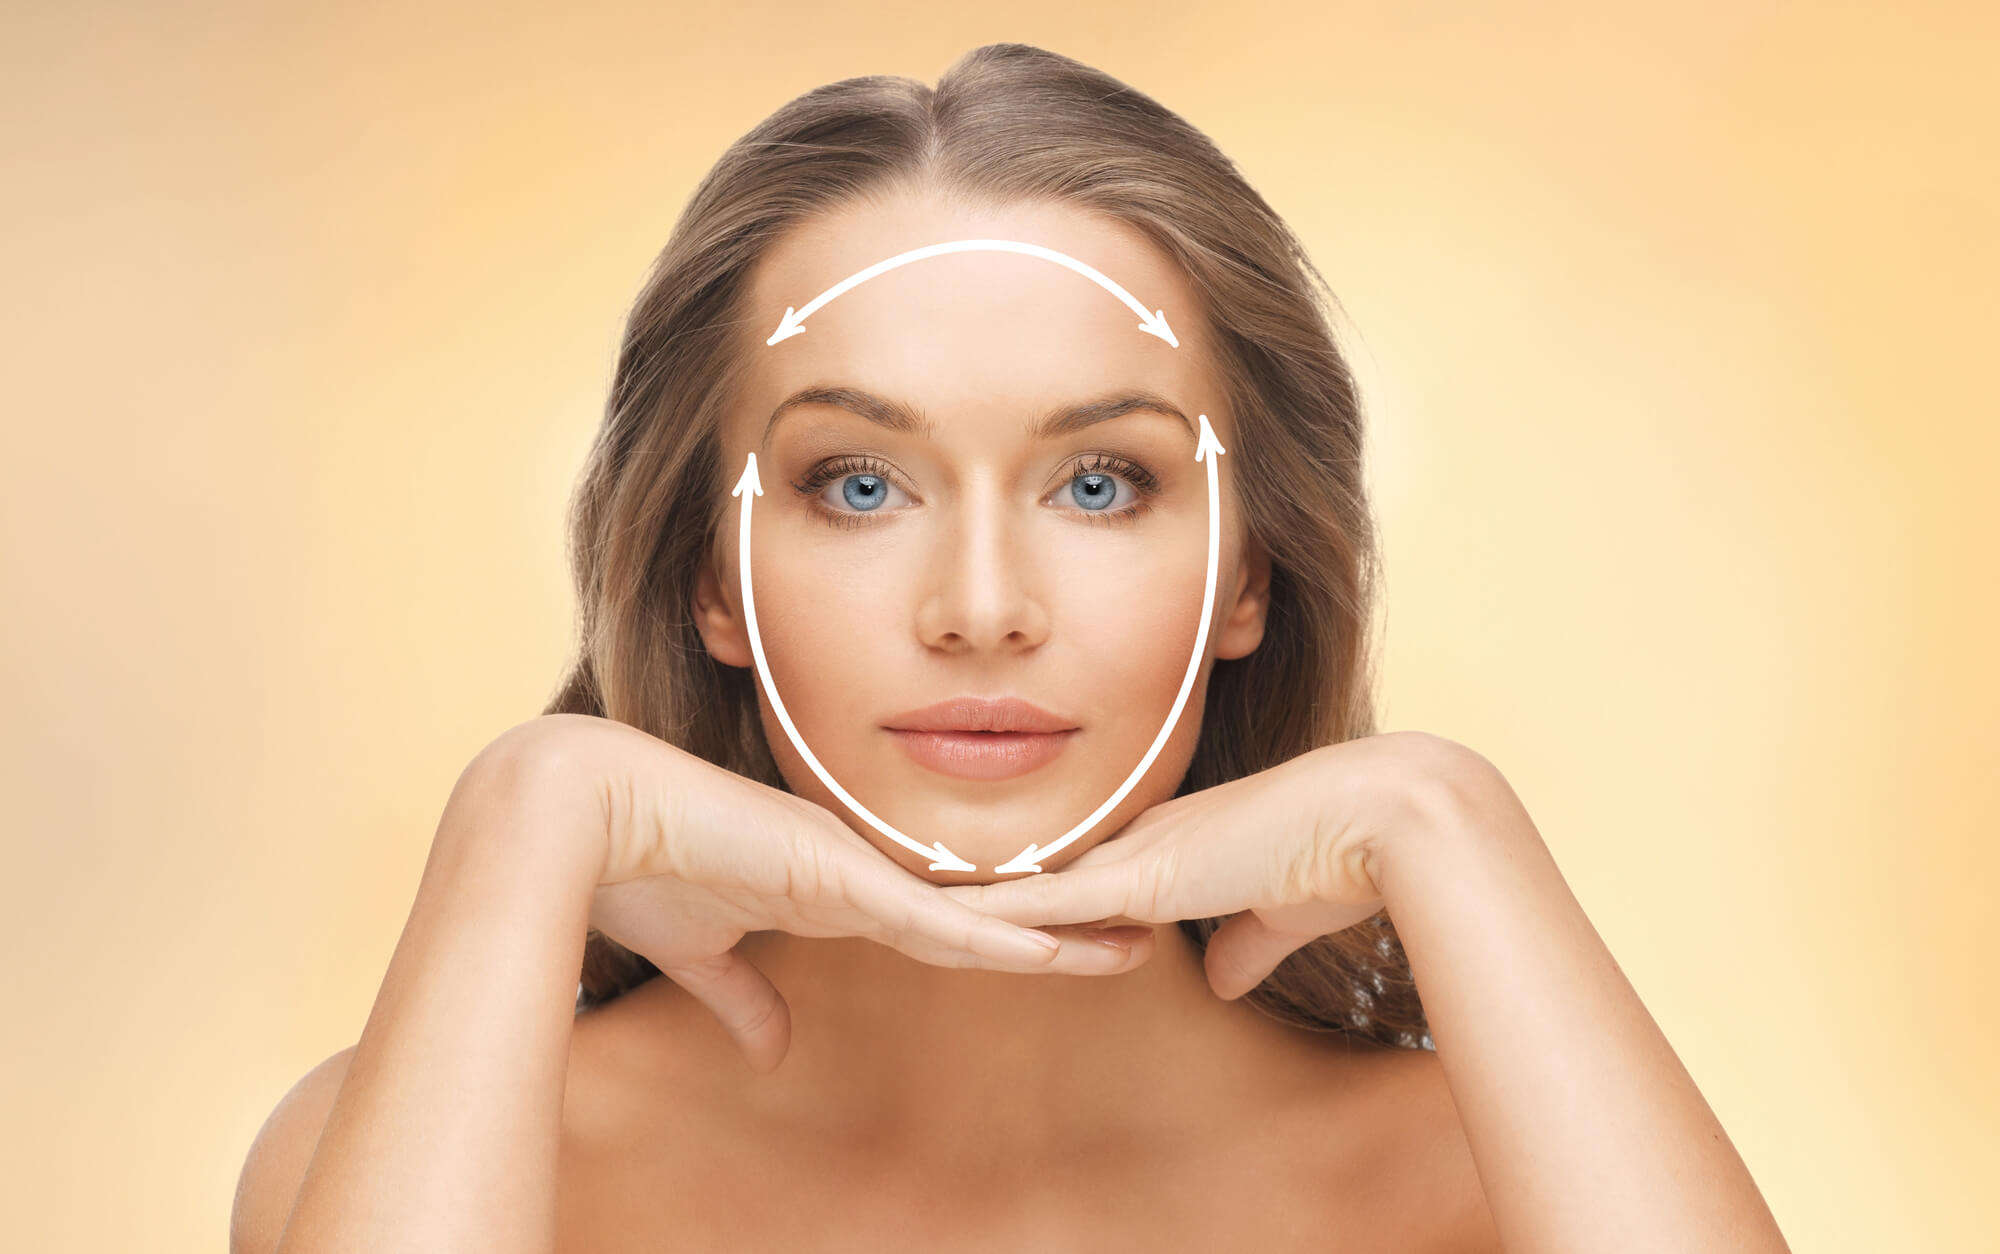 Surgical versus non-surgical facelift